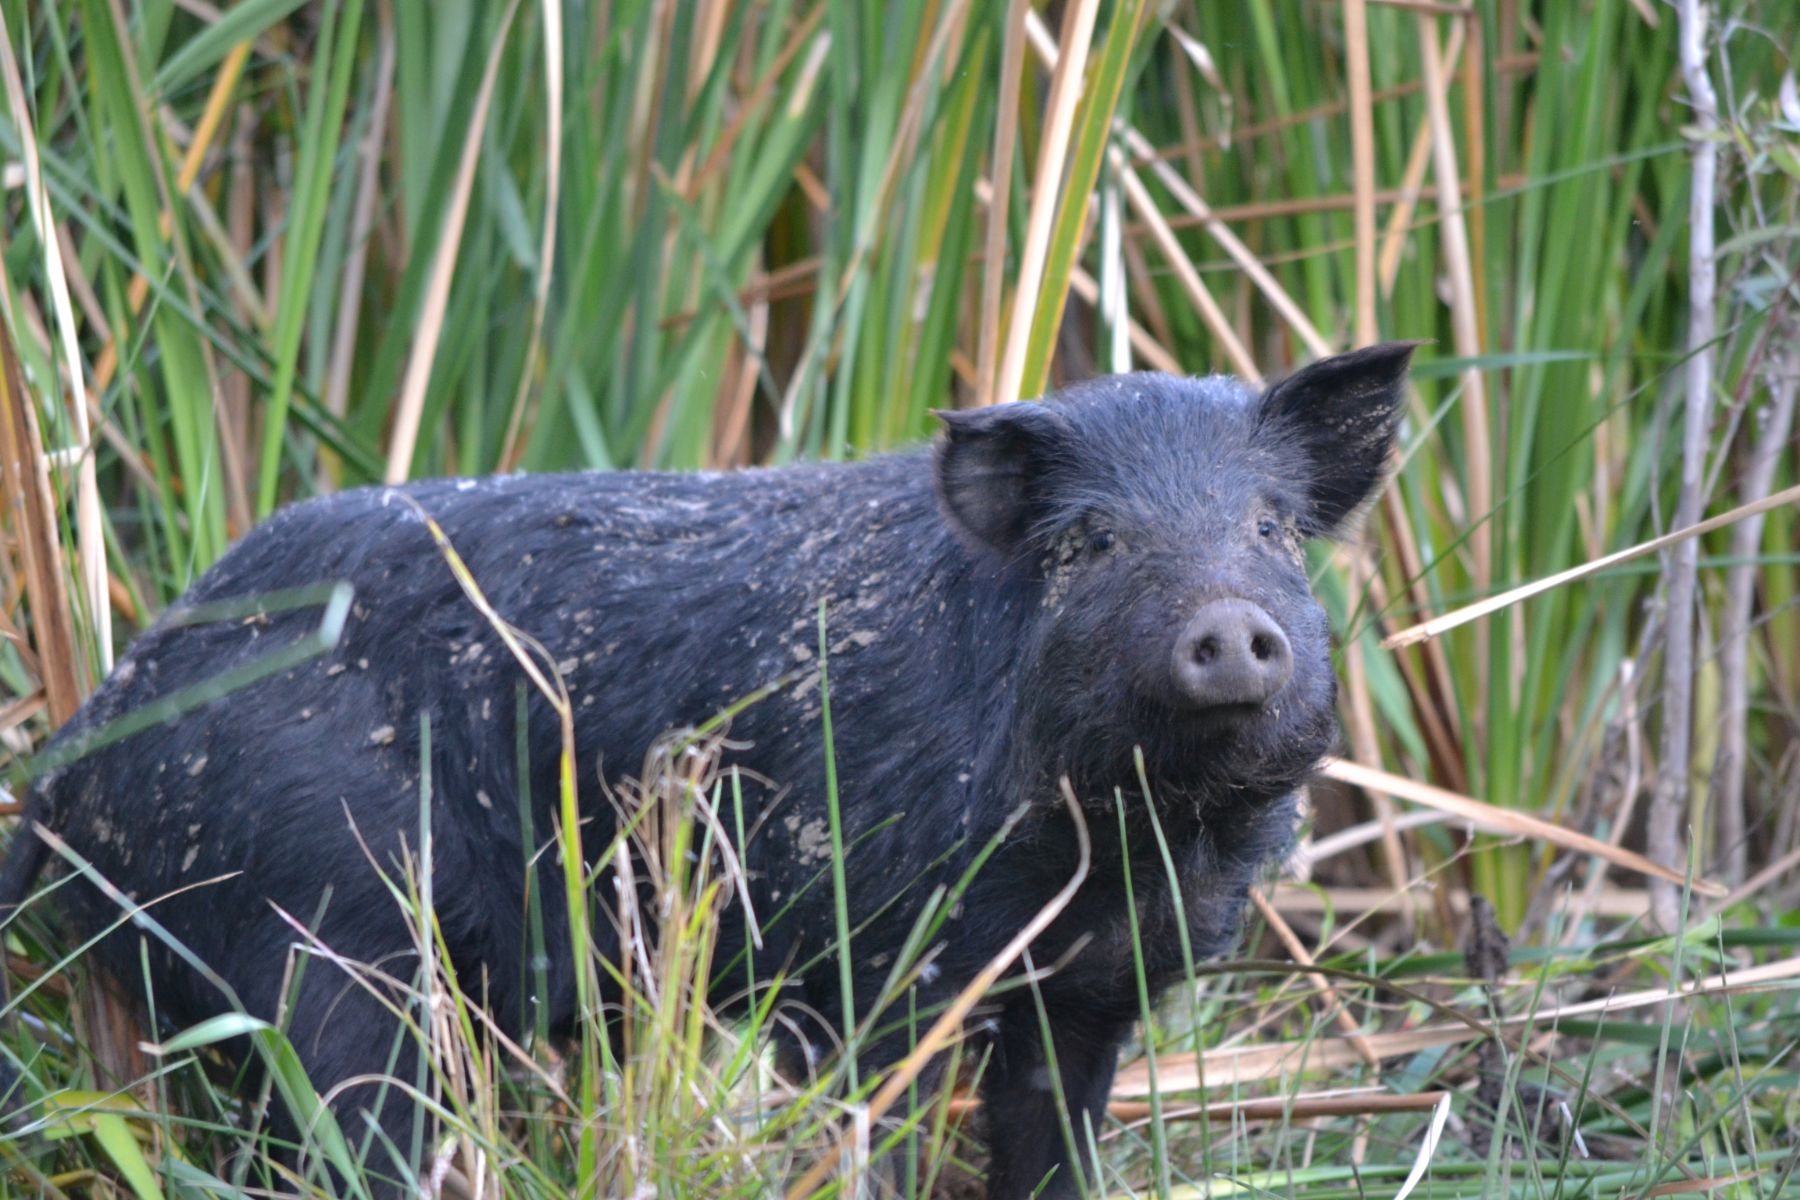 Large feral pig feeding on cumbungi roots along an inland river system.